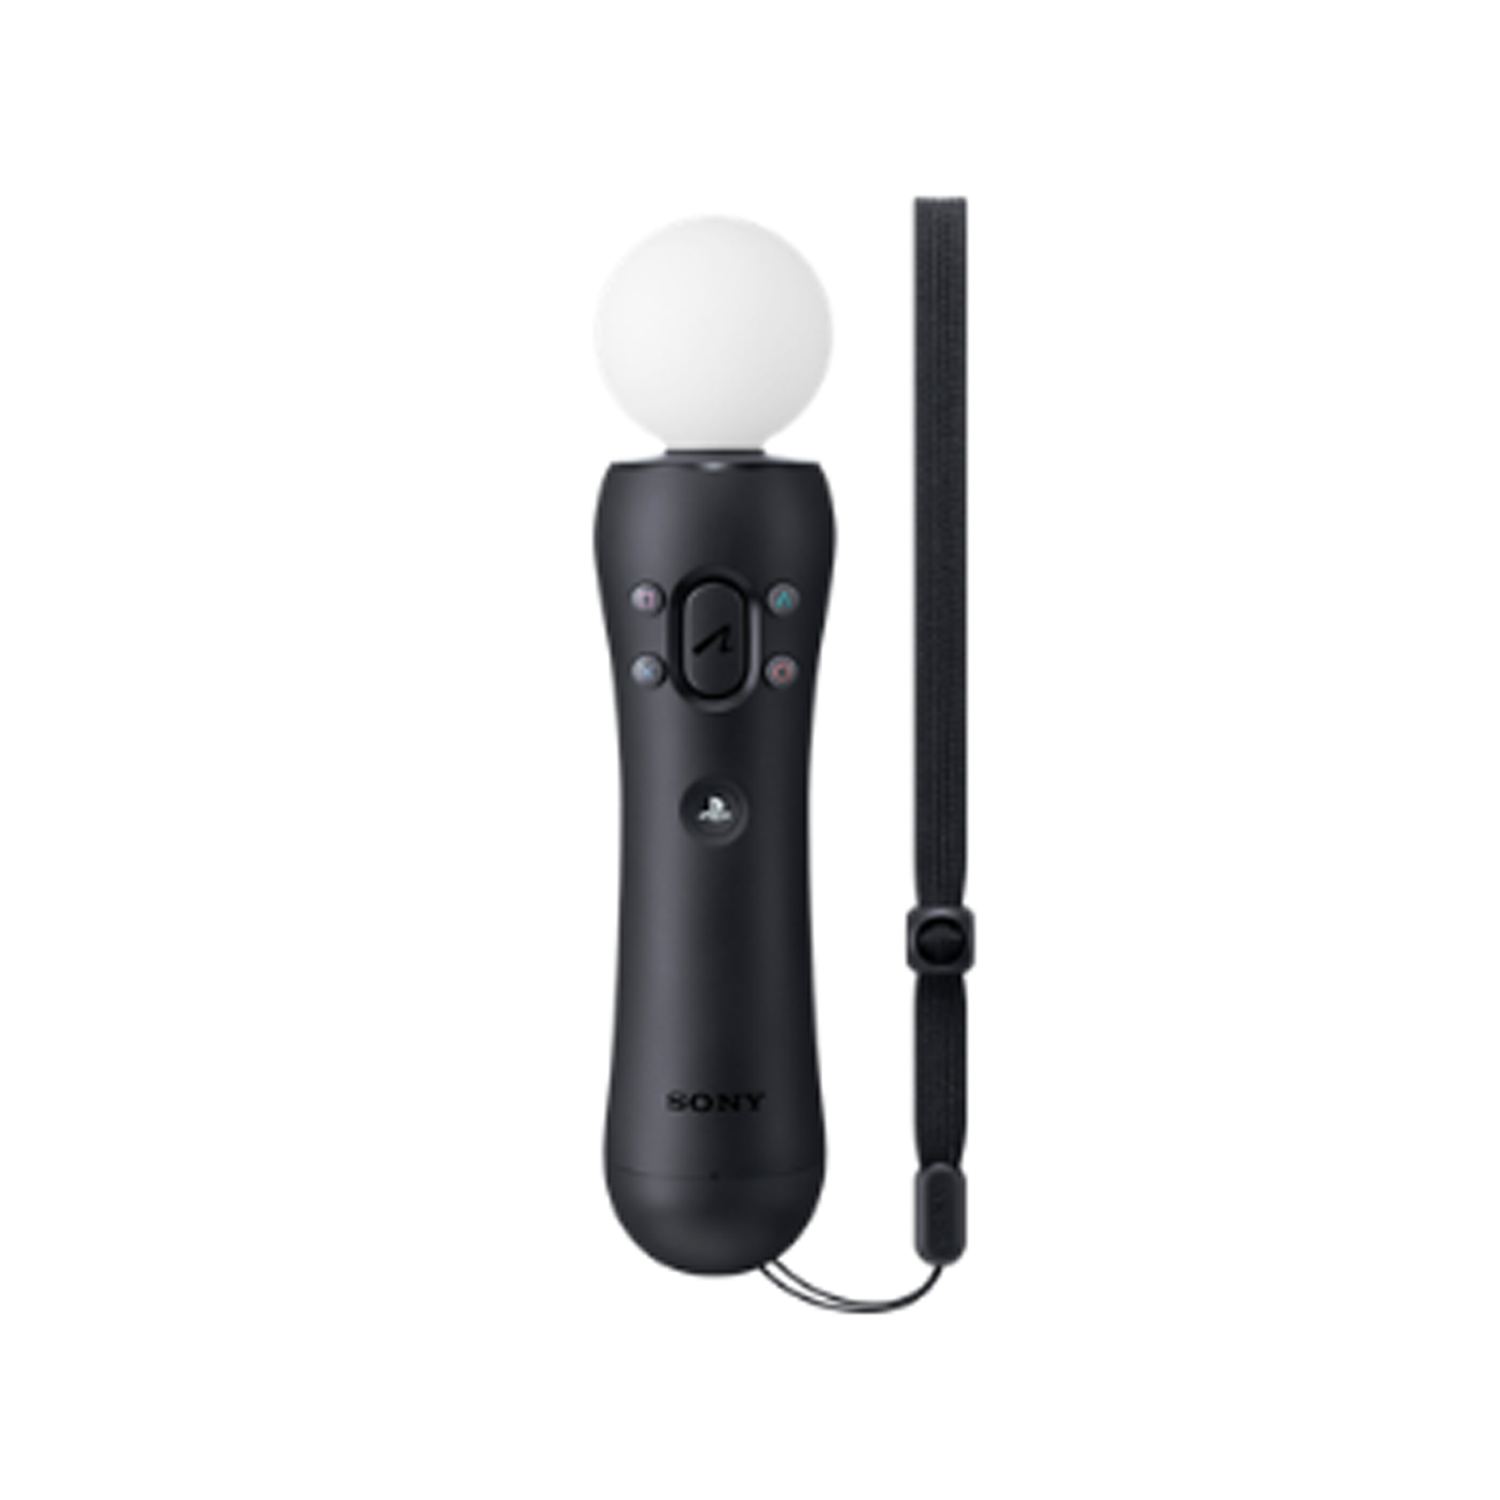 Playstation 4 Move Motion Controller for PlayStation 4